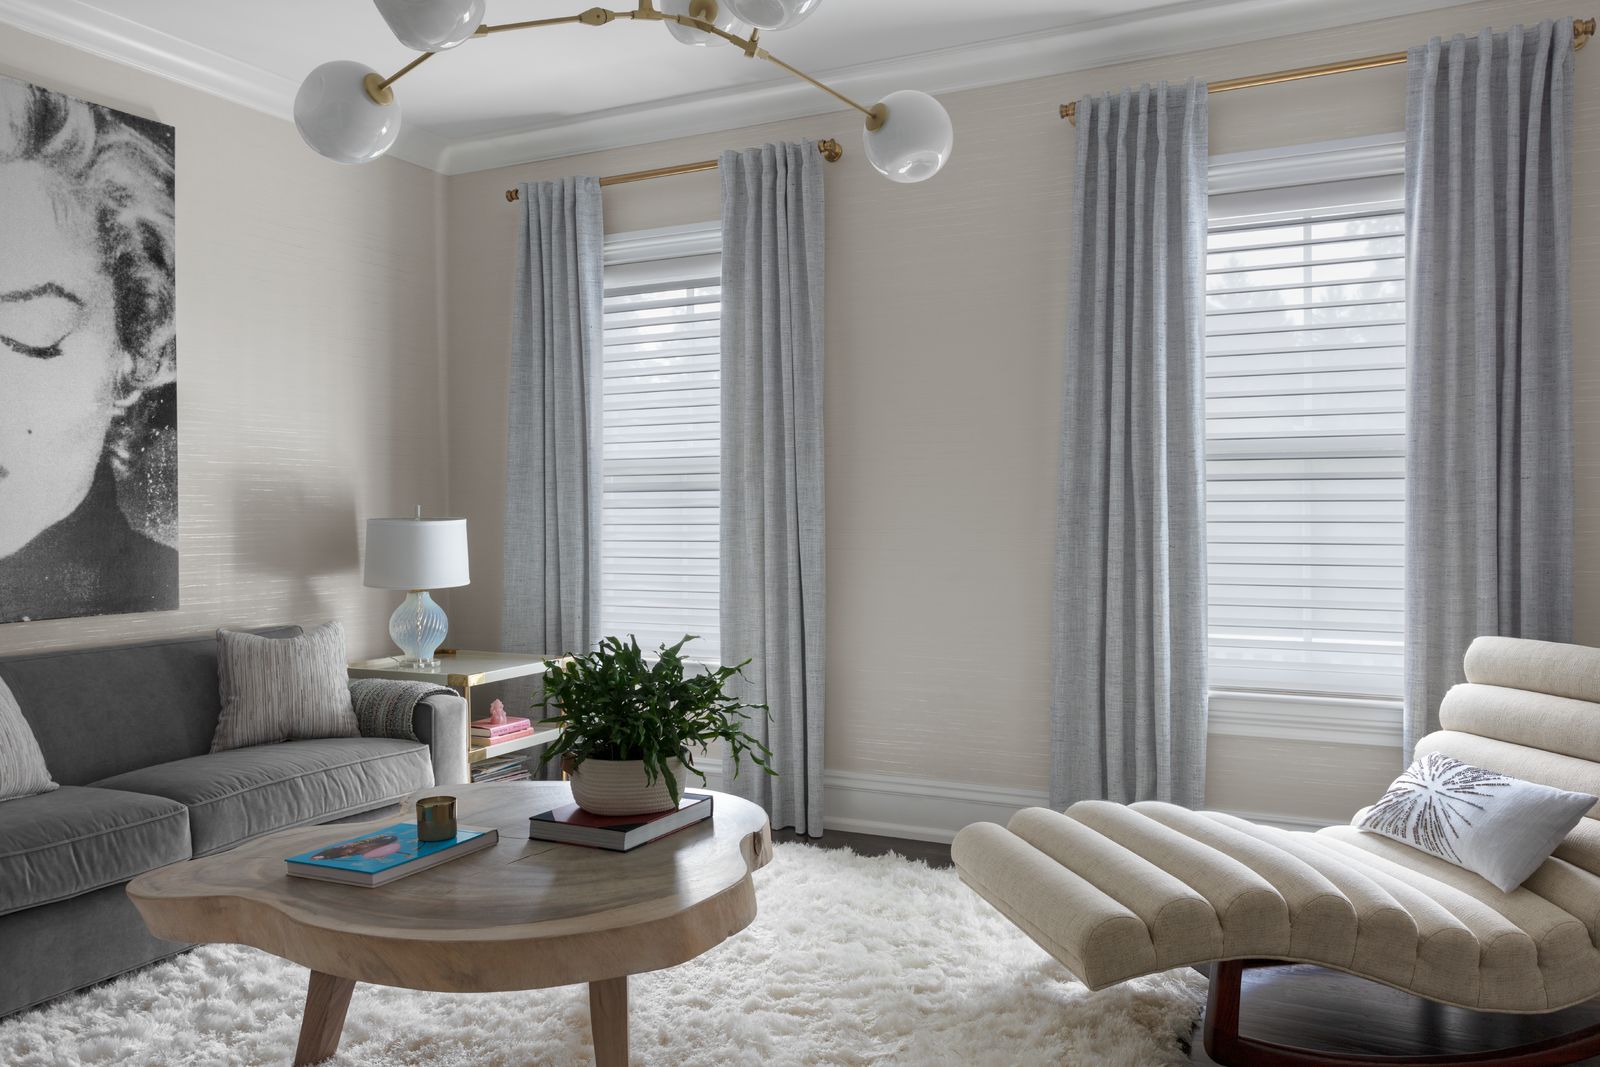 Serenity® sheer shades cover two large windows in a modern living room